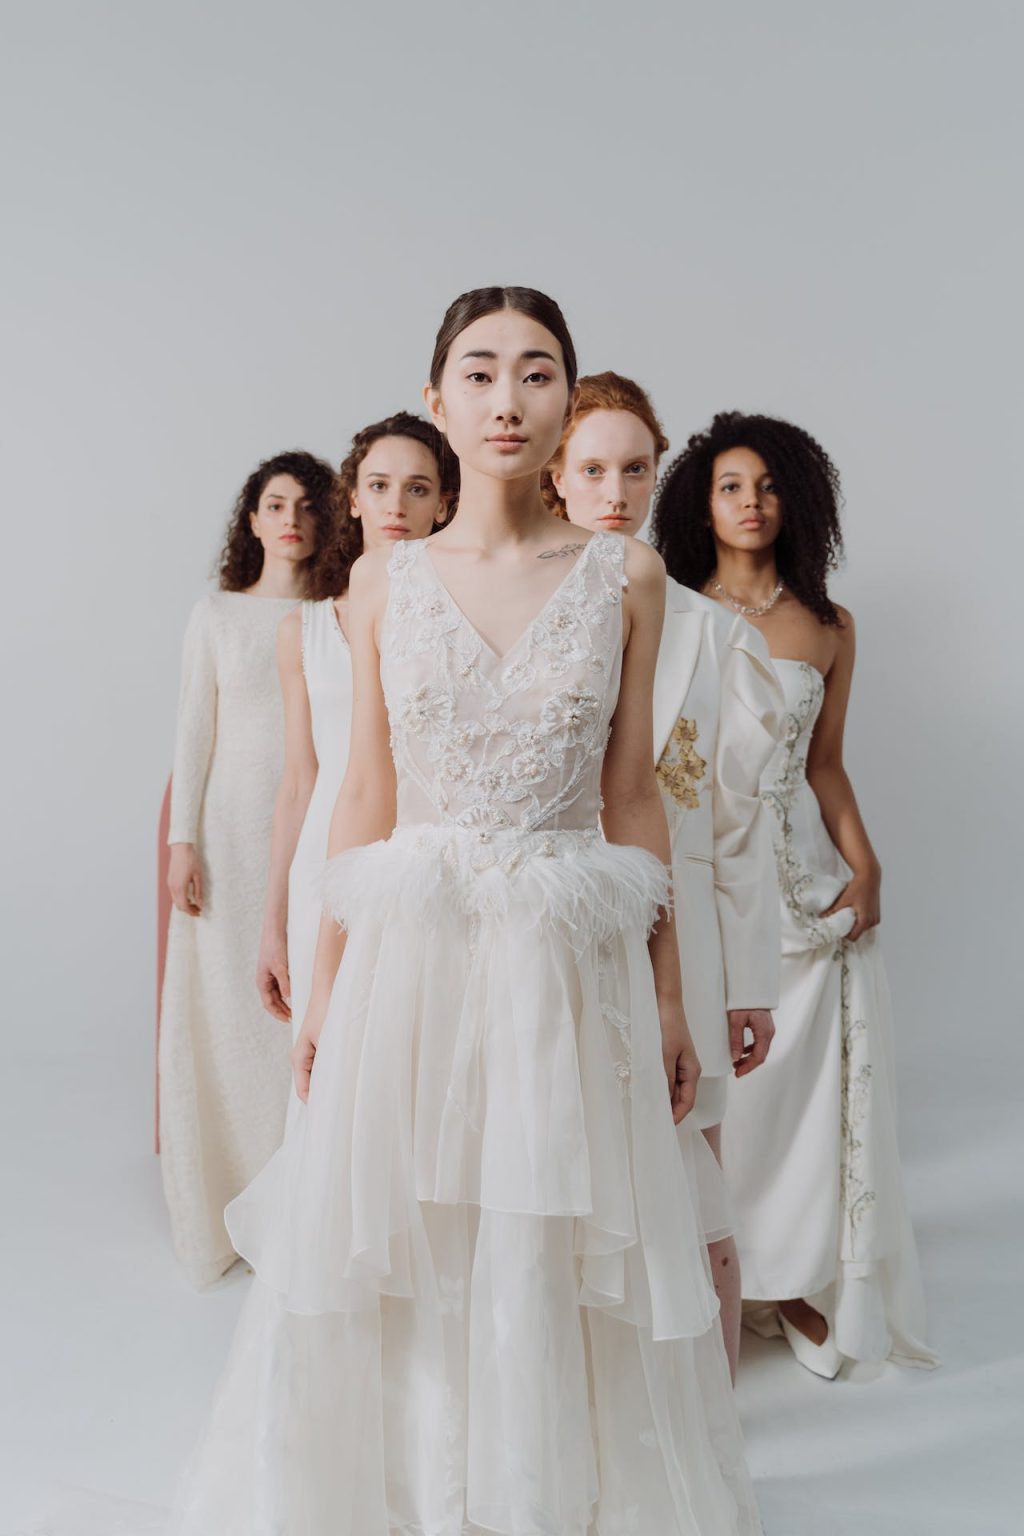 10 Reasons Why You Should Host A Bridal Trunk Show